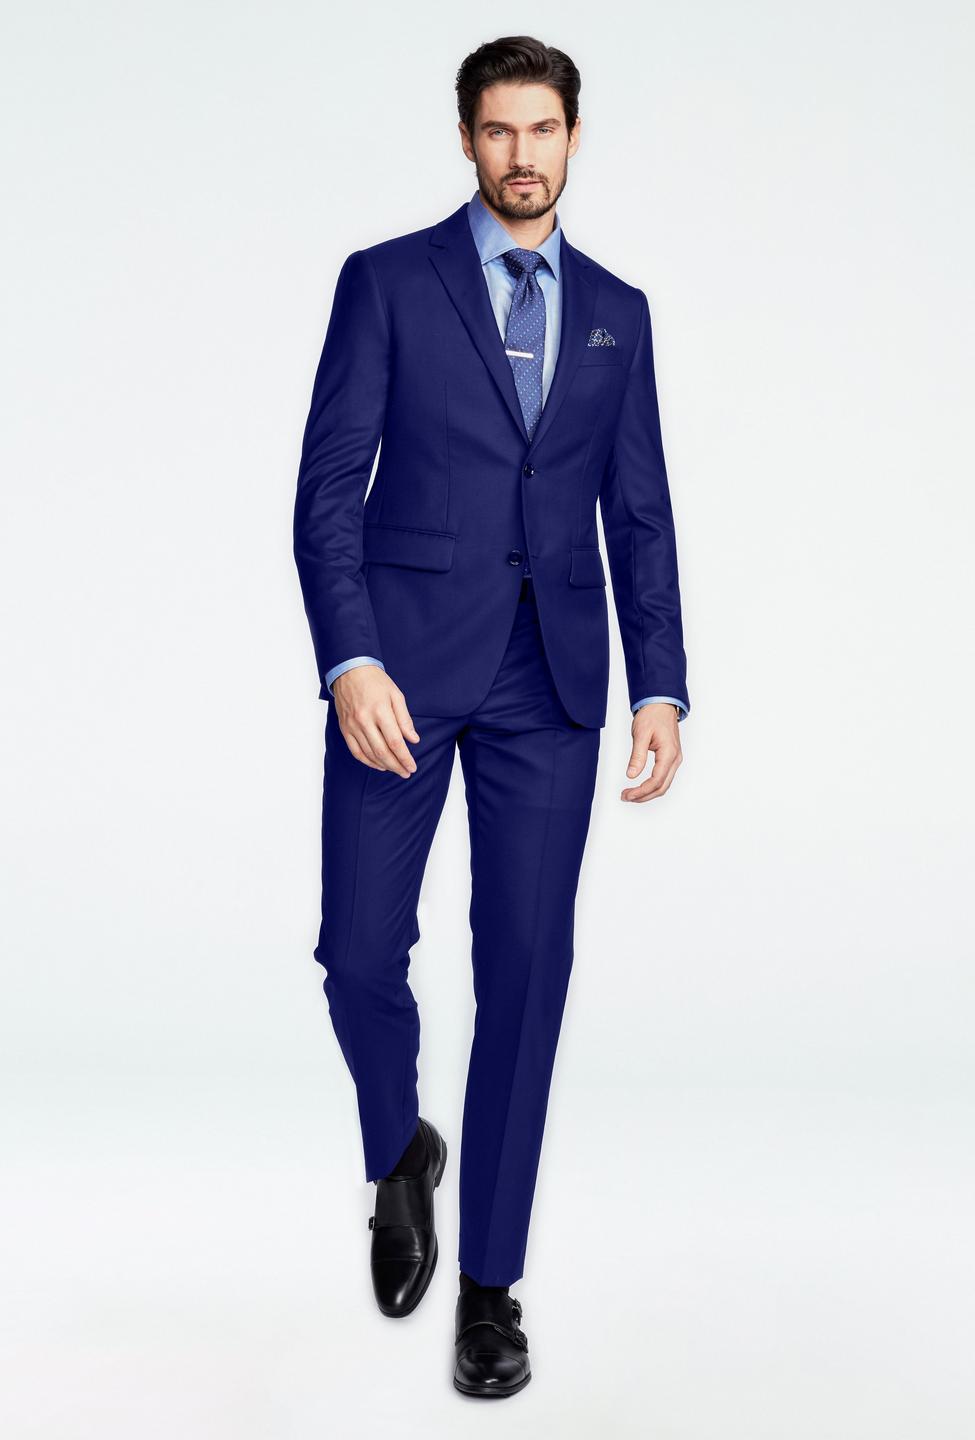 Blue blazer - Solid Design from Luxury Indochino Collection